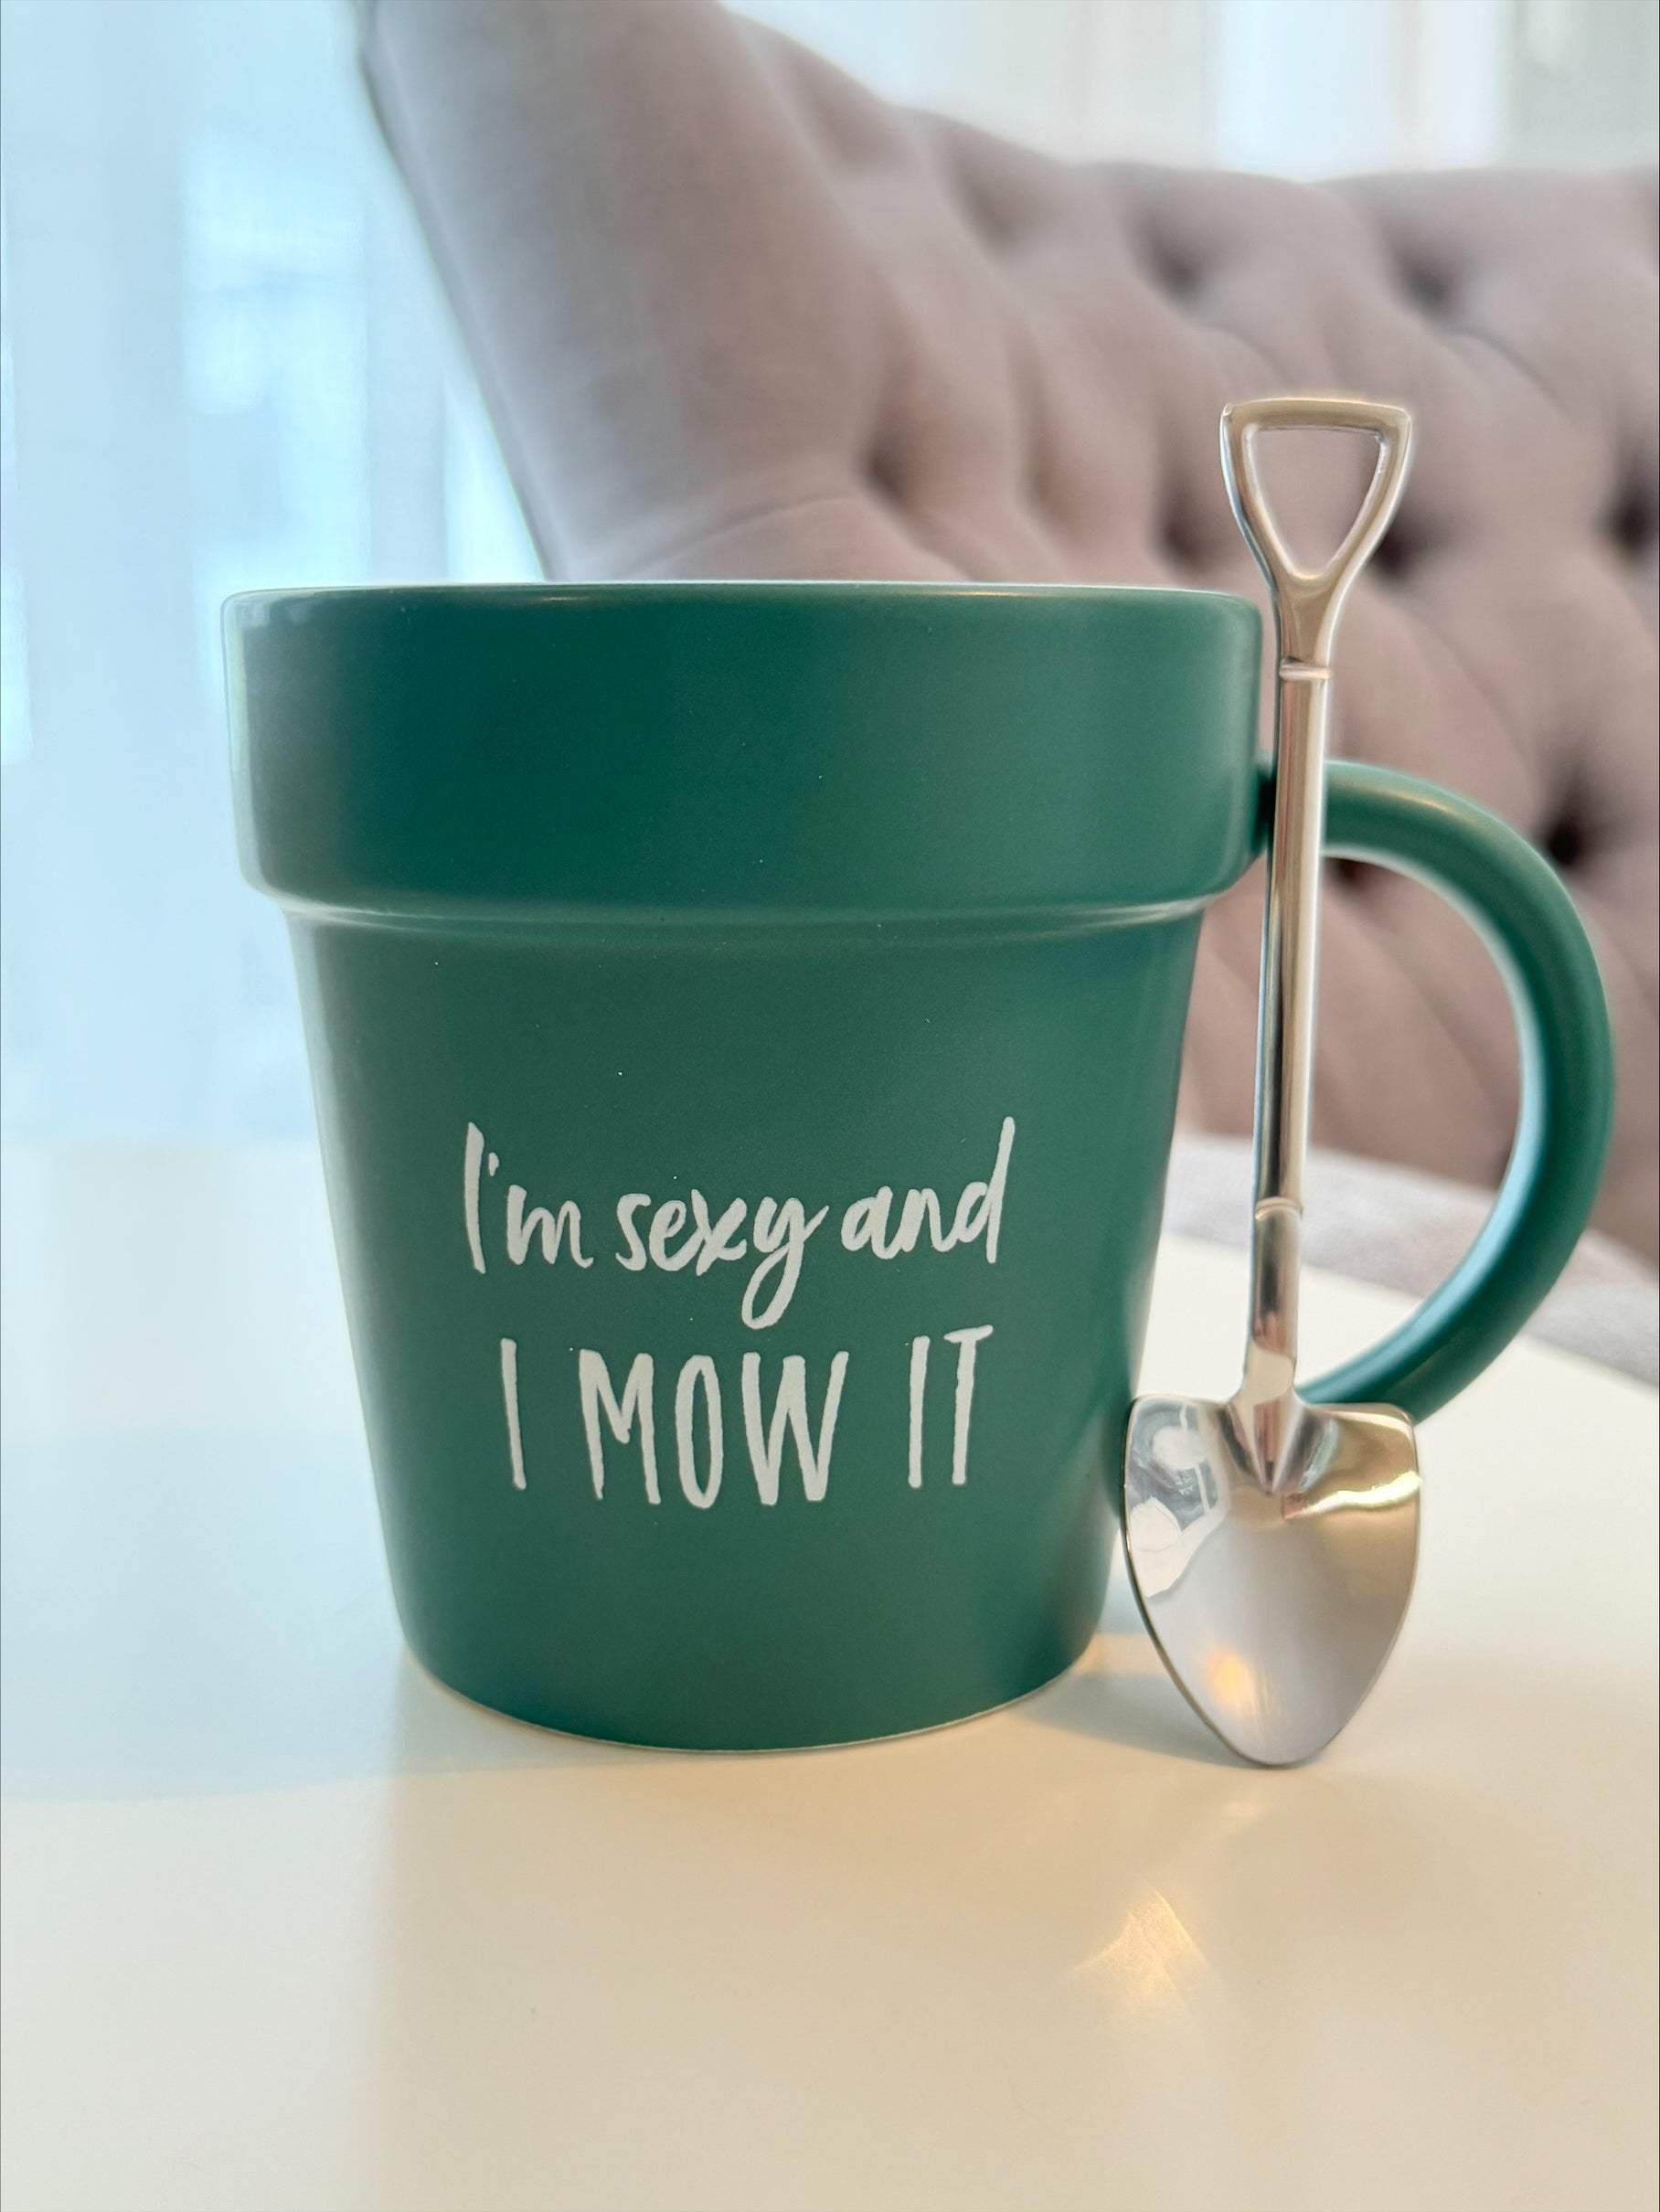 "I'm Sexy and I Mow It" Mug and Shovel Spoon set in Gift Box